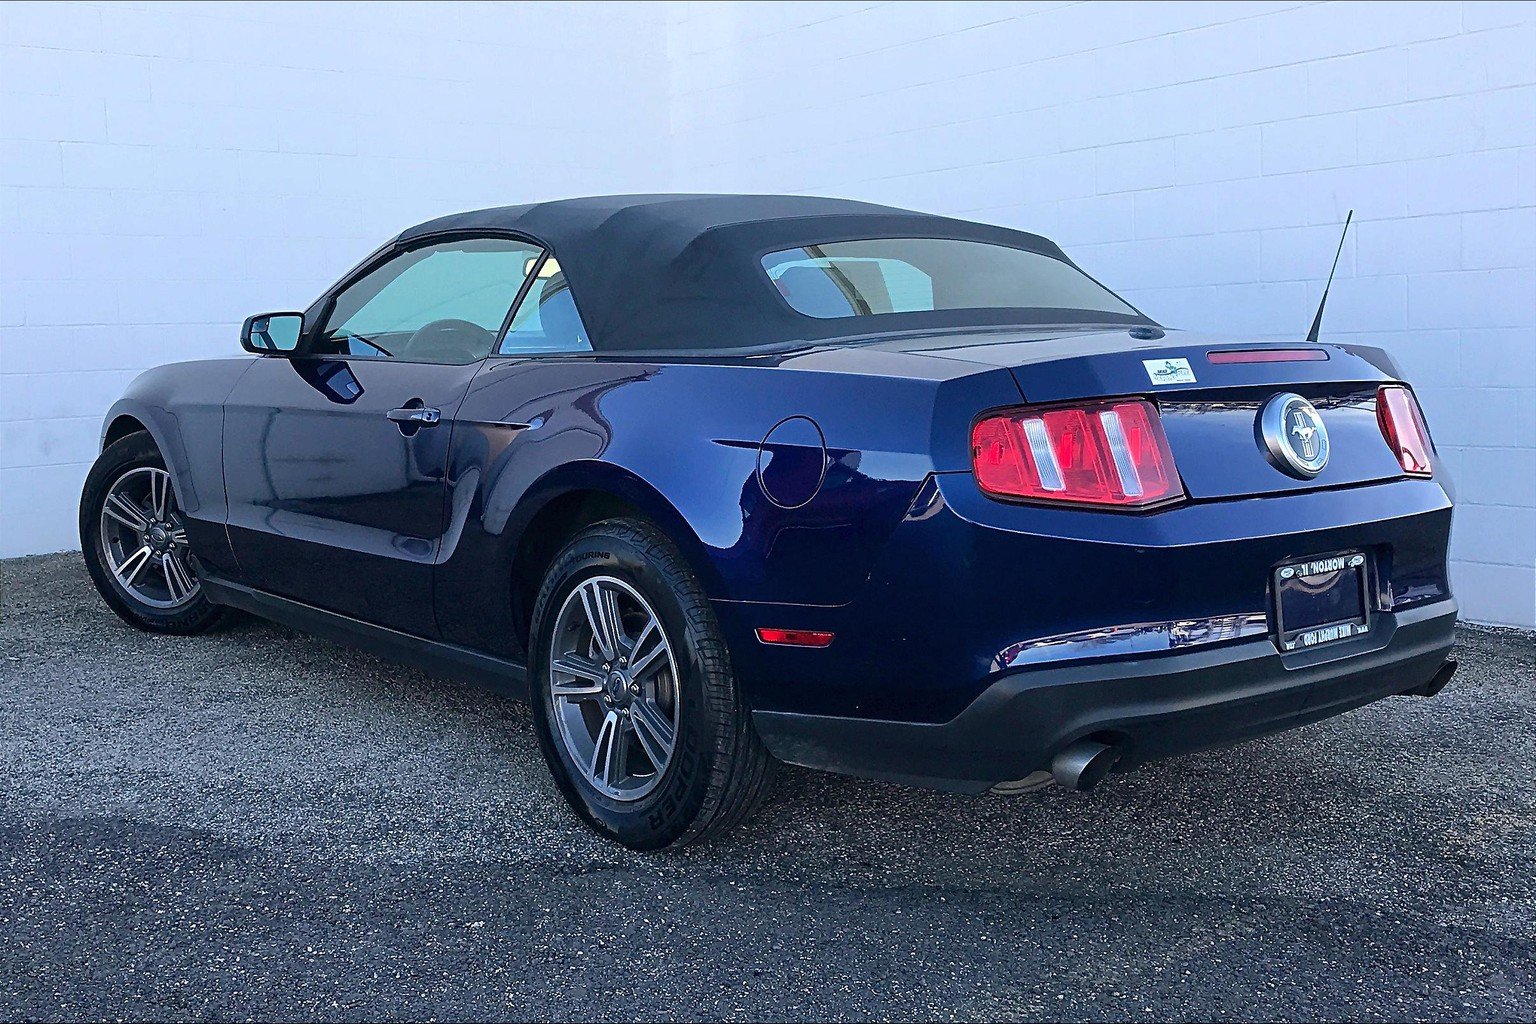 PreOwned 2012 Ford Mustang V6 Premium 2D Convertible in